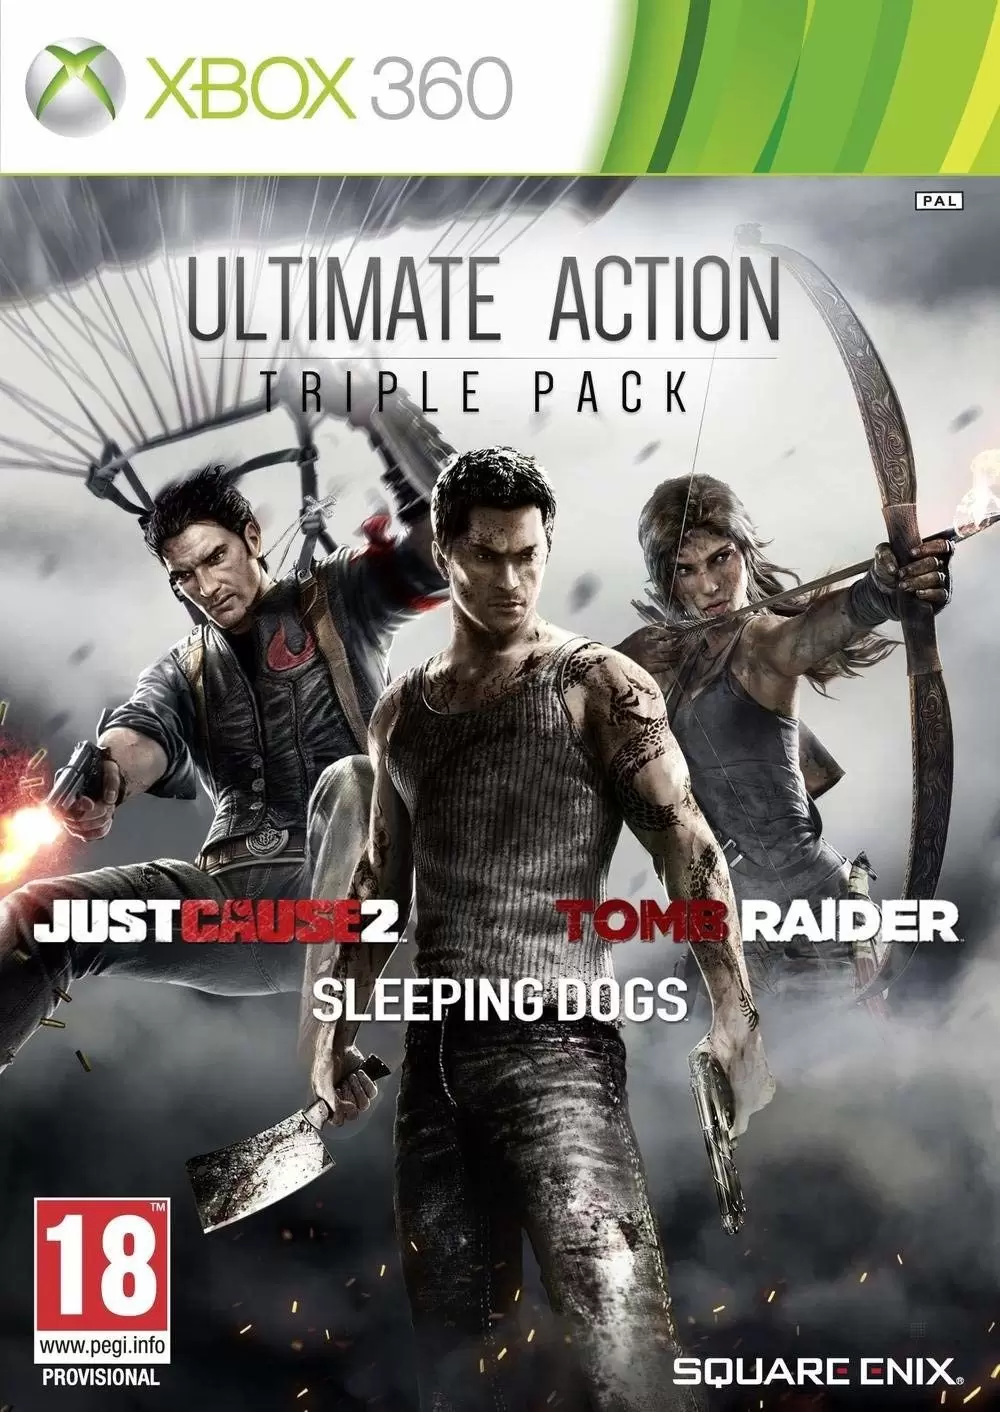 XBOX 360 Games - Ultimate Action Triple Pack